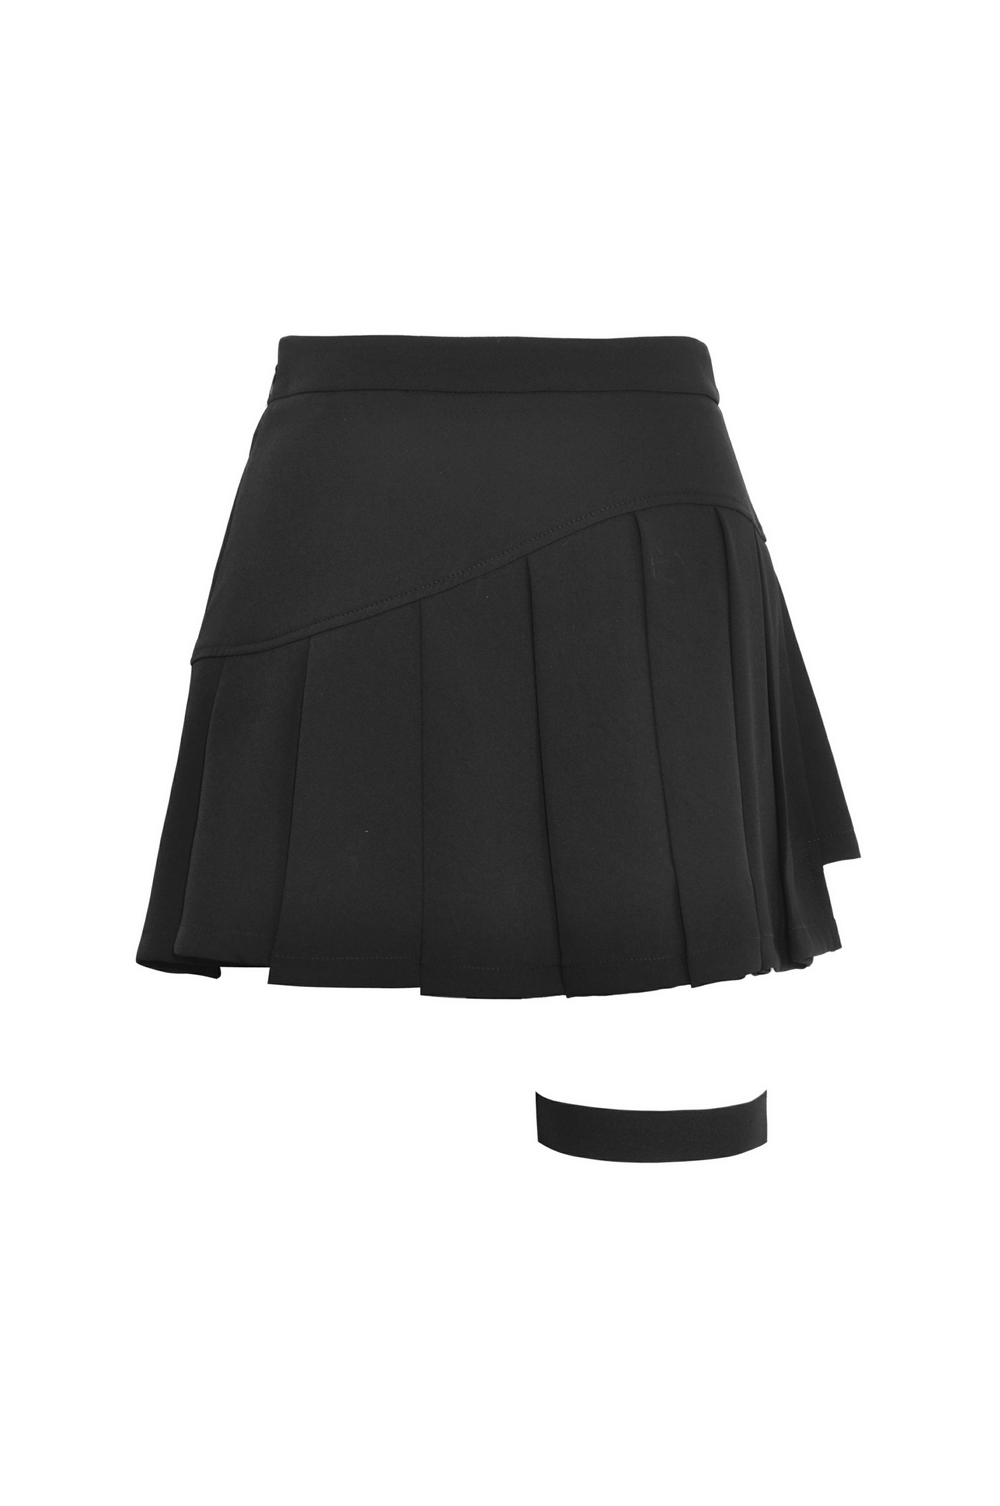 Black Asymmetrical Pleated Punk Skirt with Safety Pins